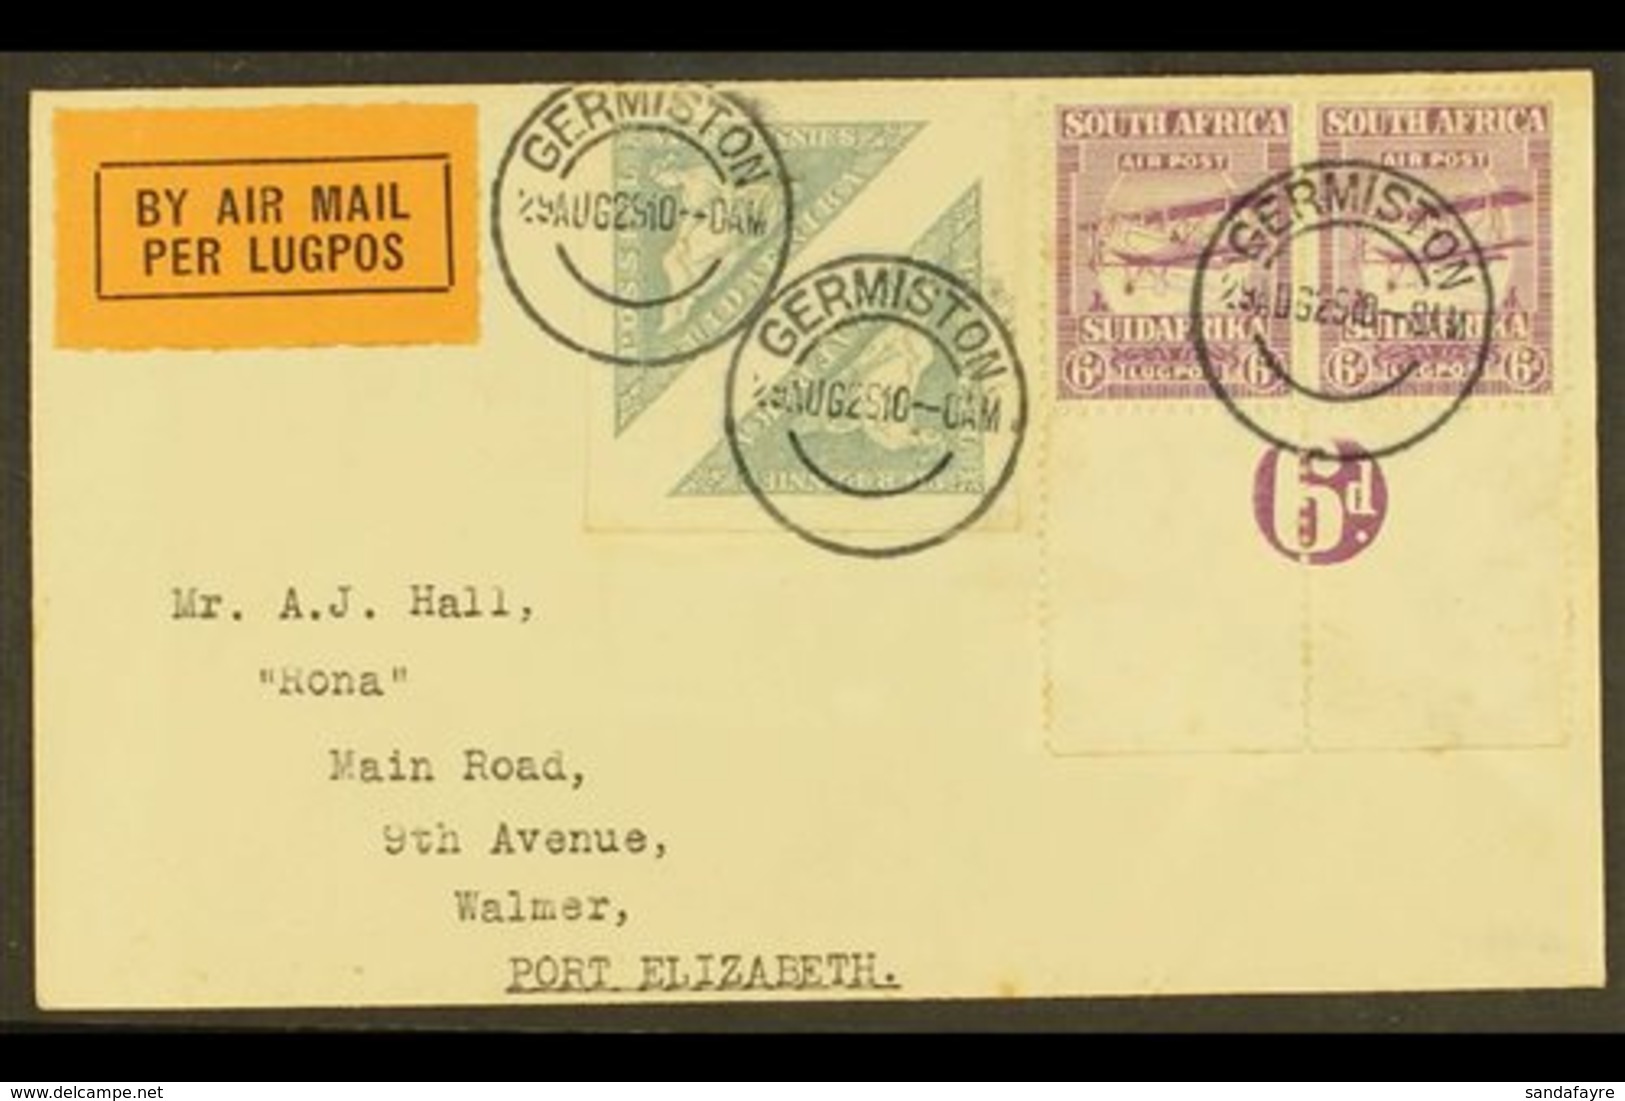 1929 (29 Aug) Airmailed Cover To Port Elizabeth, Franked With 1926 4d Triangle Pair & 1925 6d Airmail Numeral Margin Pai - Unclassified